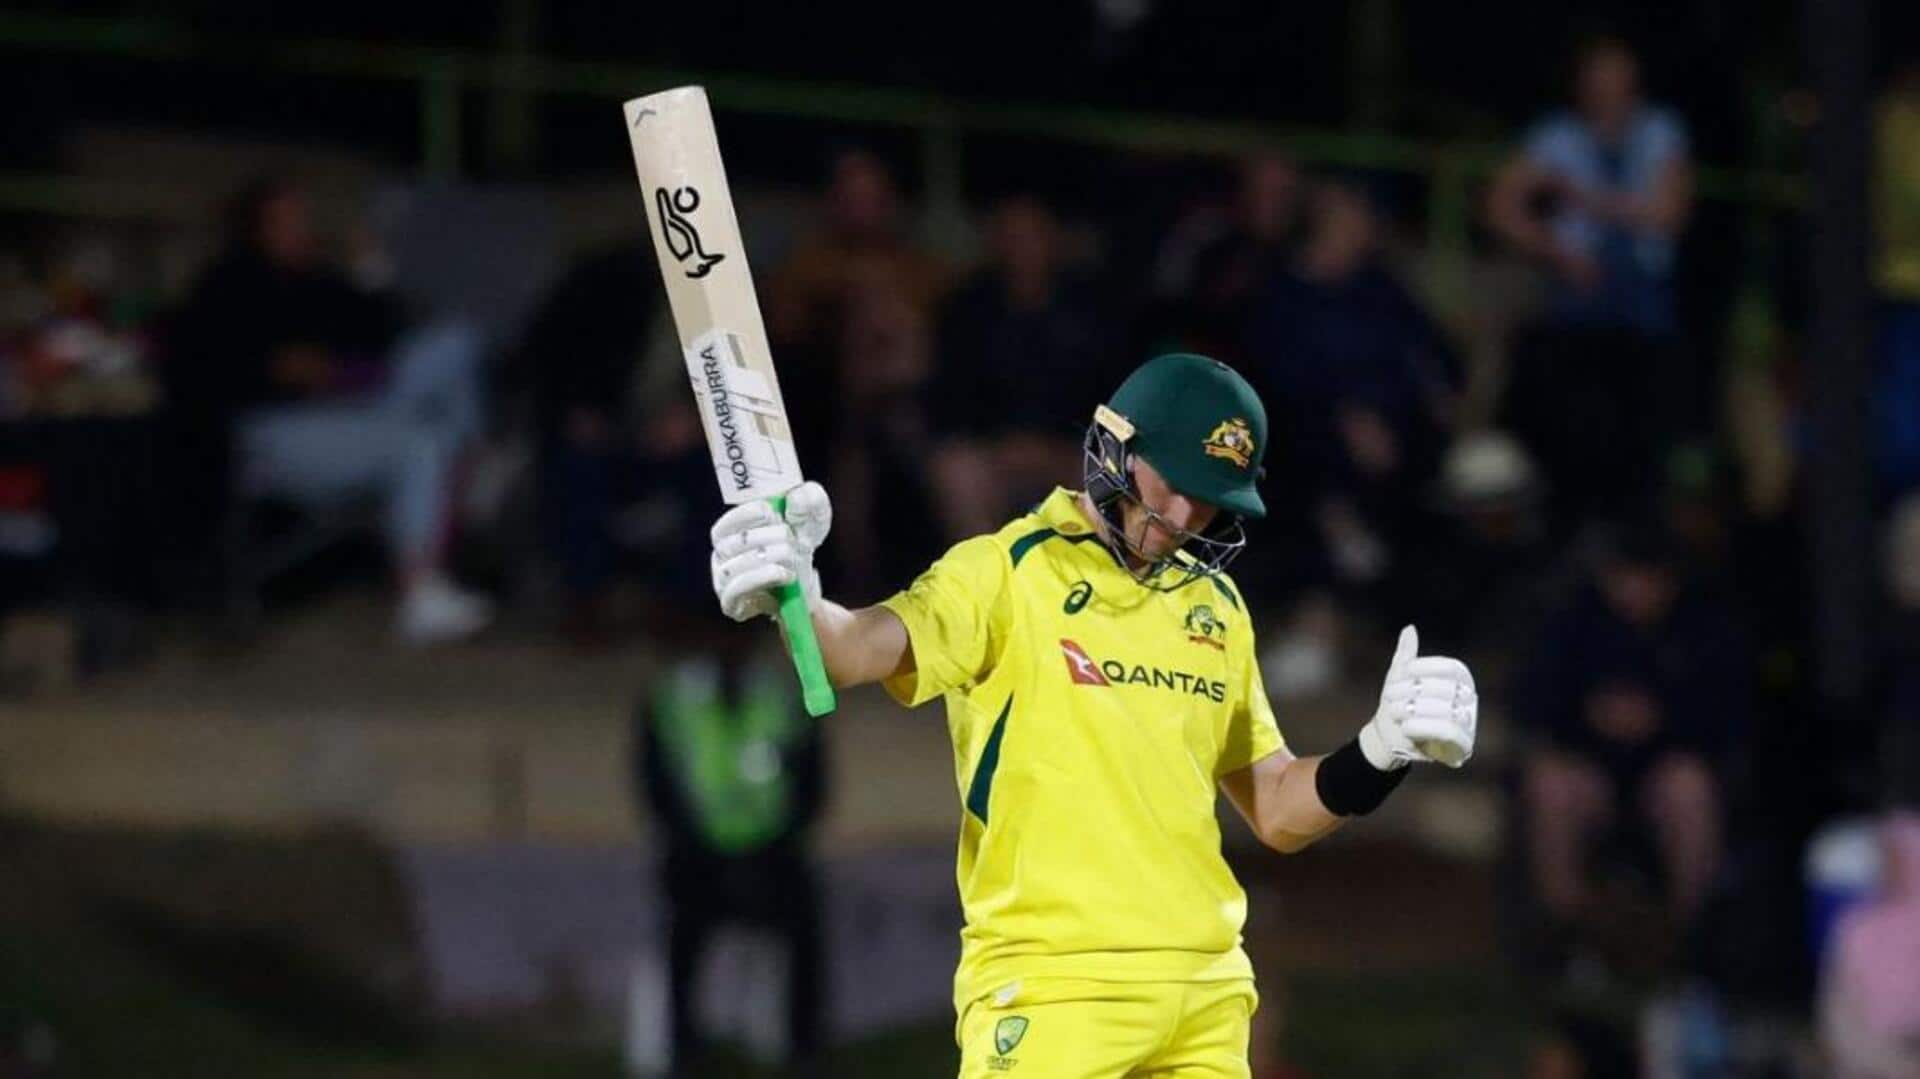 Australia down South Africa in first ODI: Key stats